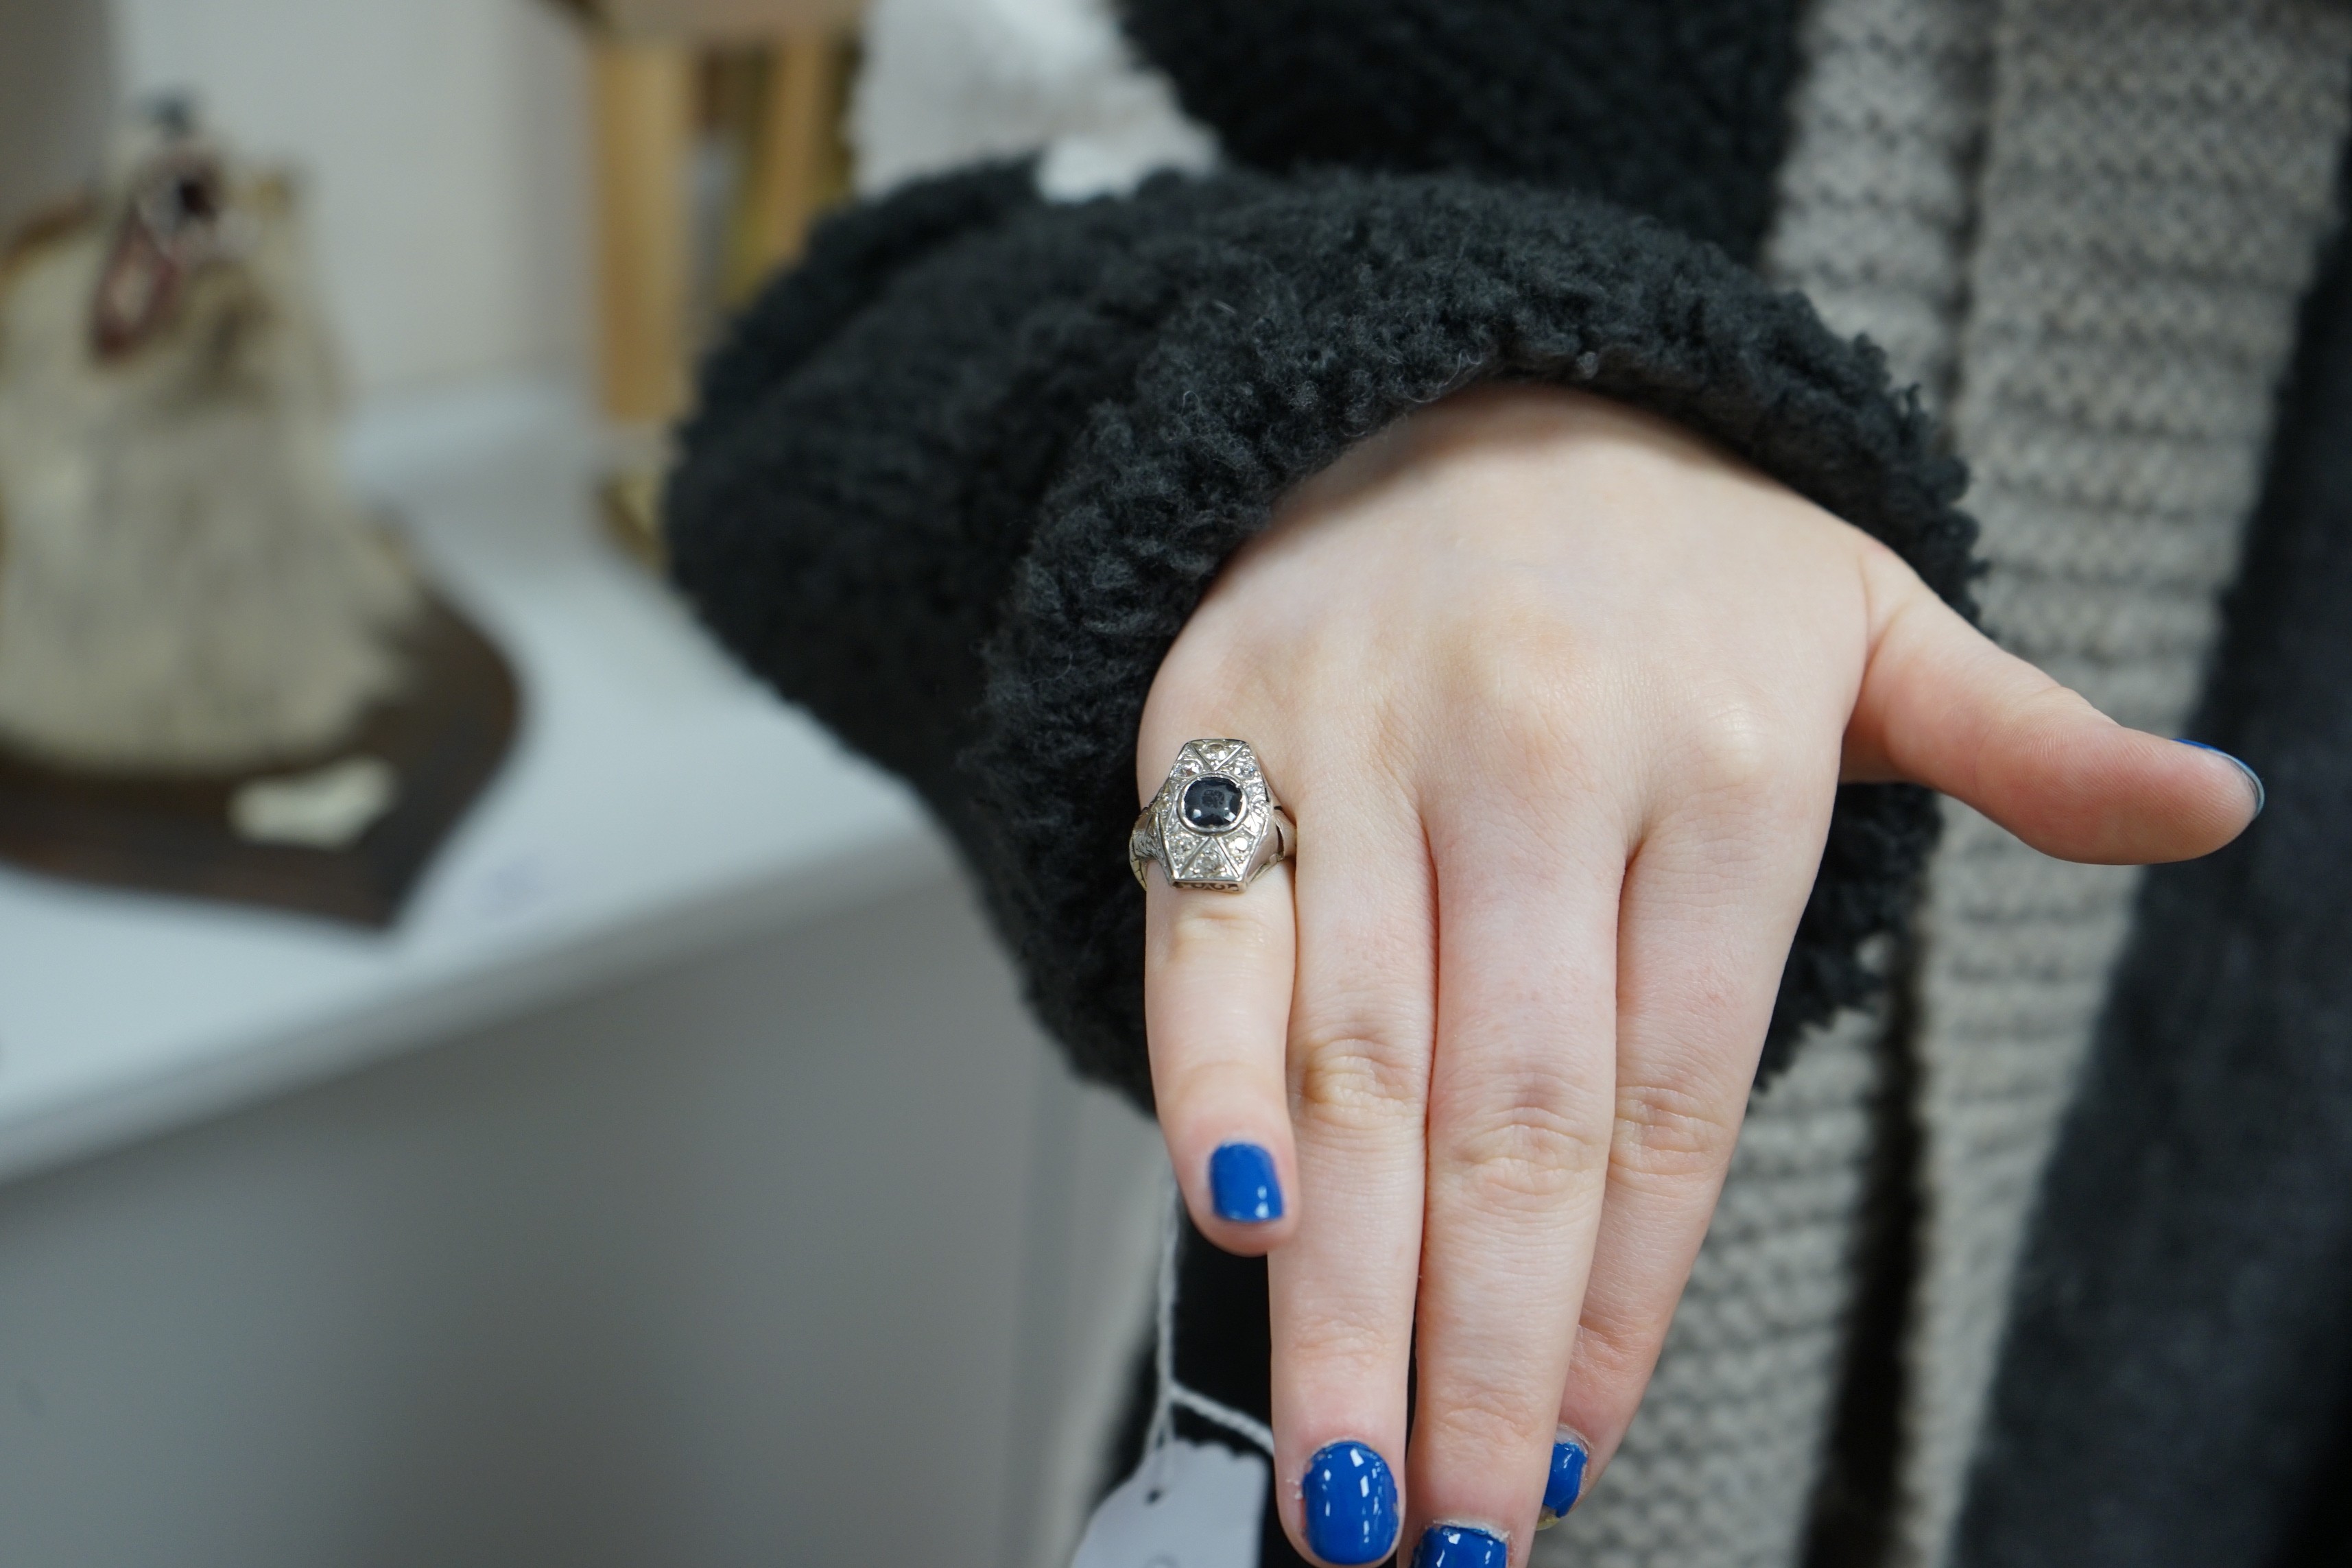 A 1940's? white metal, sapphire and diamond cluster set hexagonal dress ring, size L, gross weight 4.6 grams.